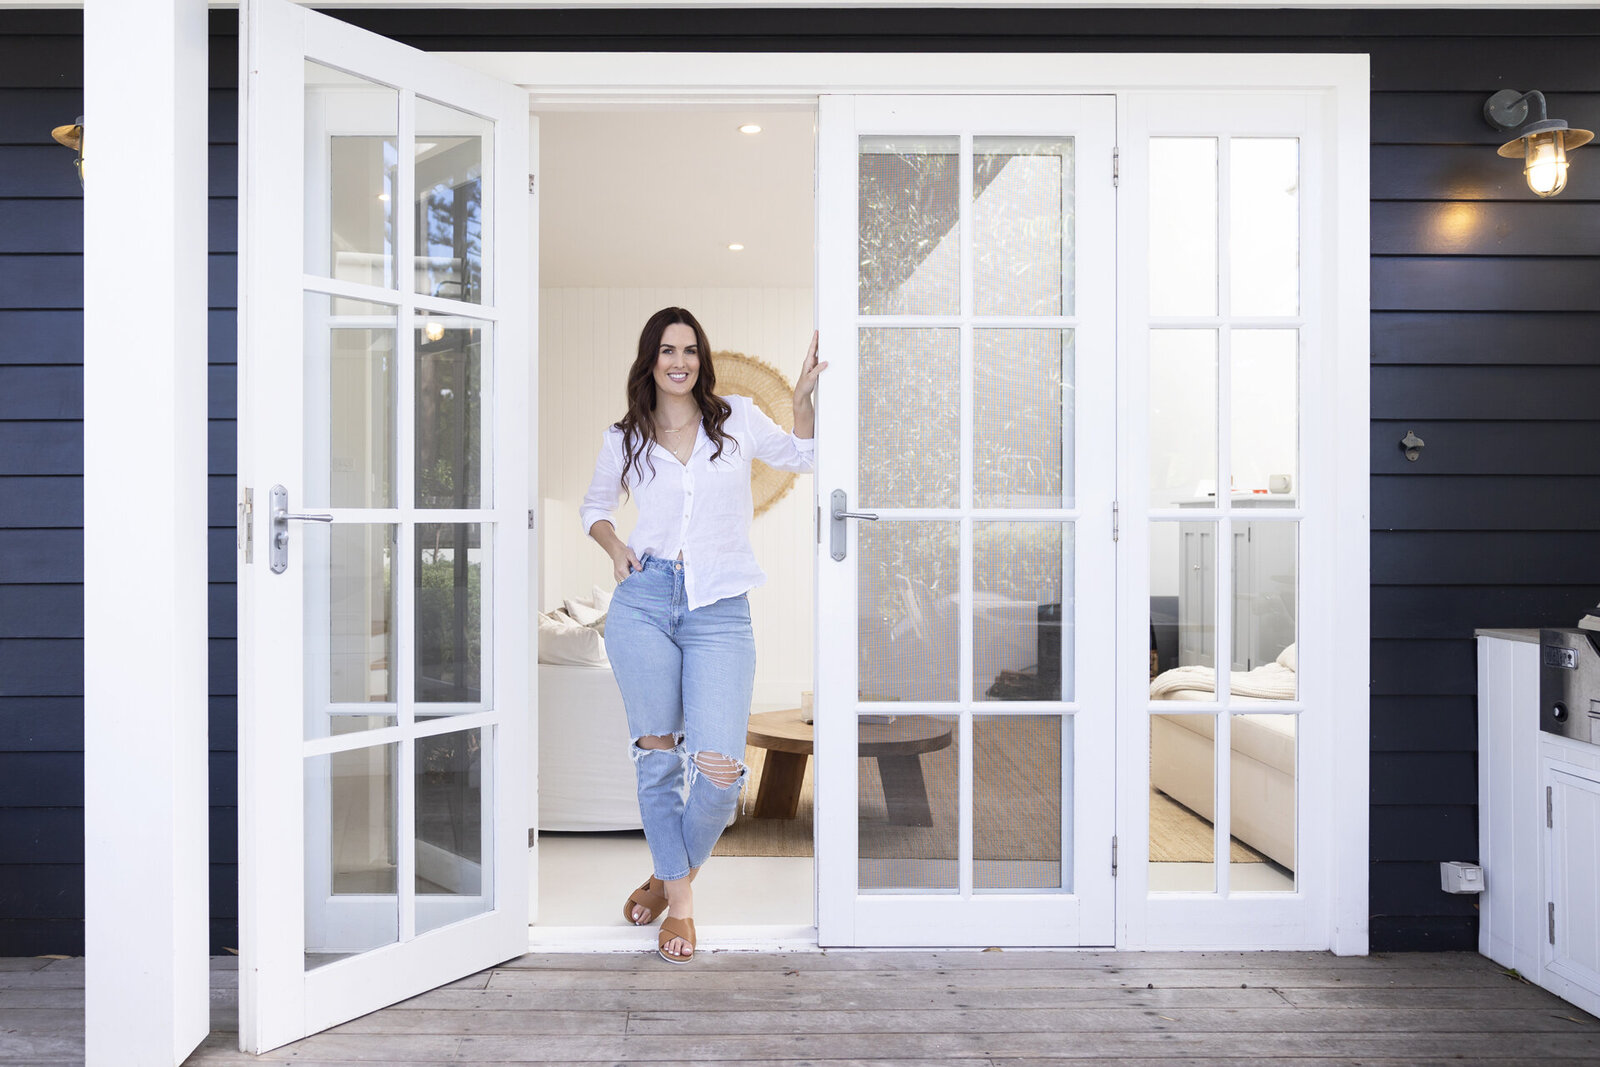 Lady standing in doorway wearing jeans and a white shirt